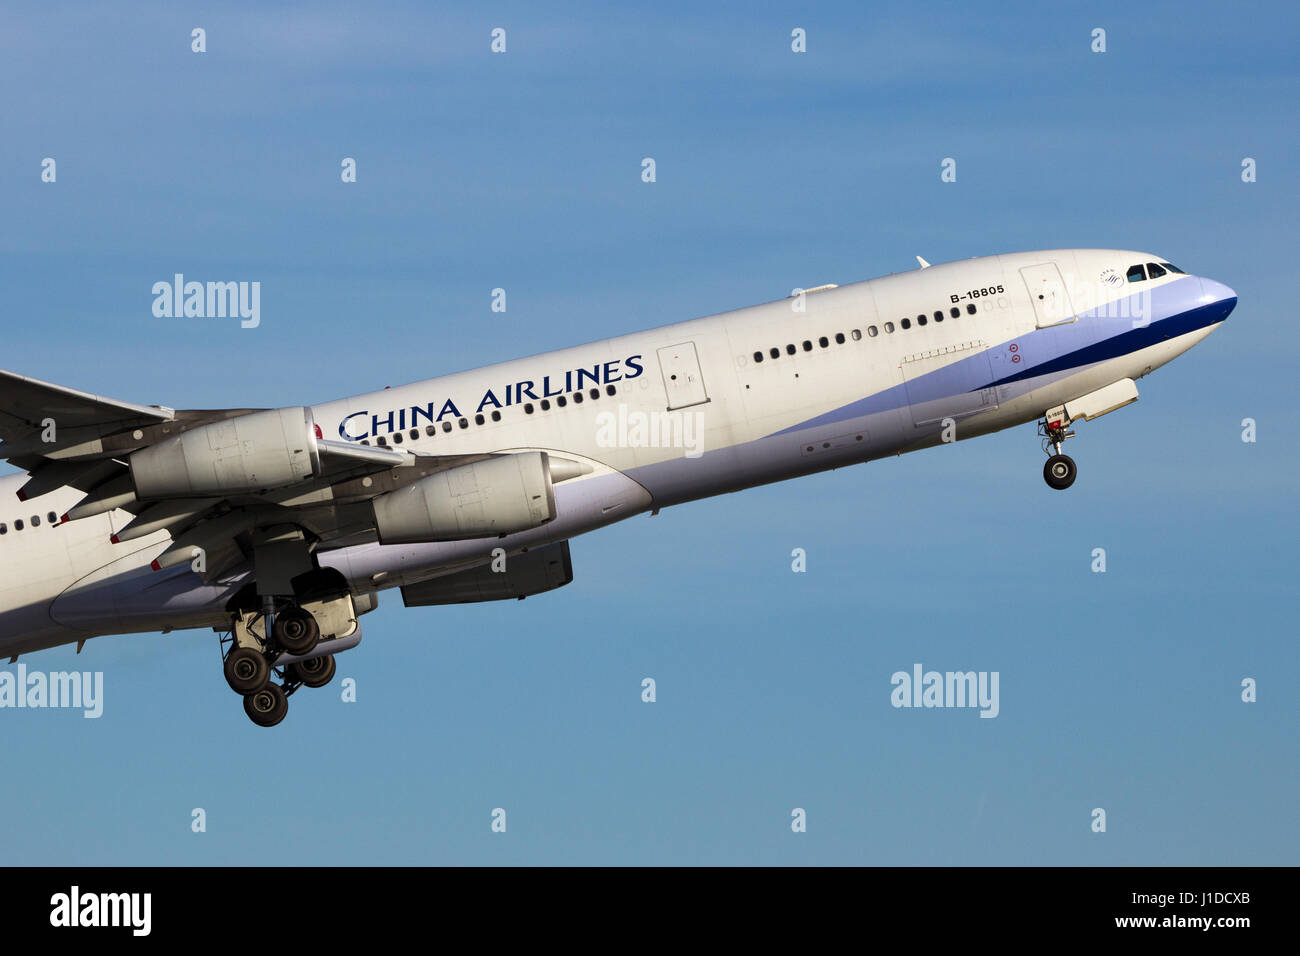 AMSTERDAM-SCHIPHOL - FEB 16, 2016: China Airlines Airbus A340 airplane take-off from Schiphol airport. Stock Photo